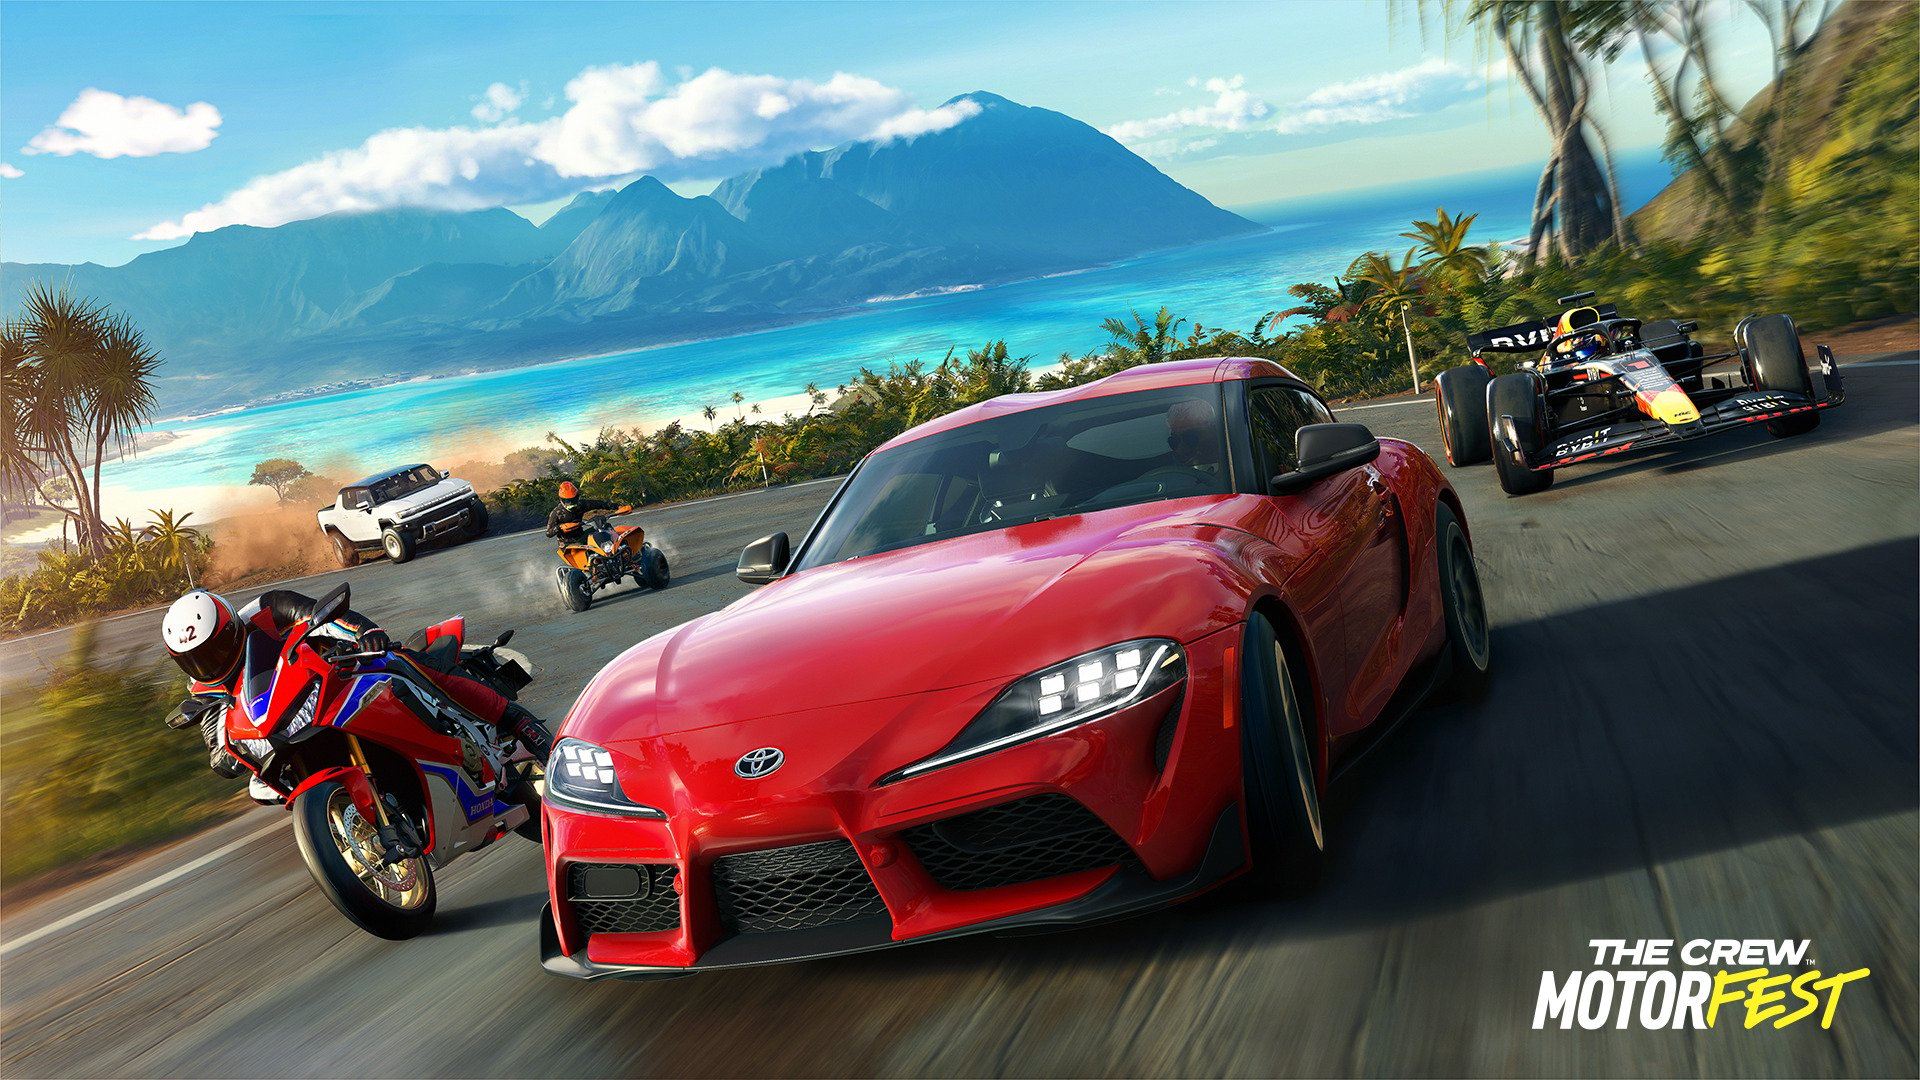 The Crew Motorfest Live-Action Trailer Claims Life is Better at Motorfest